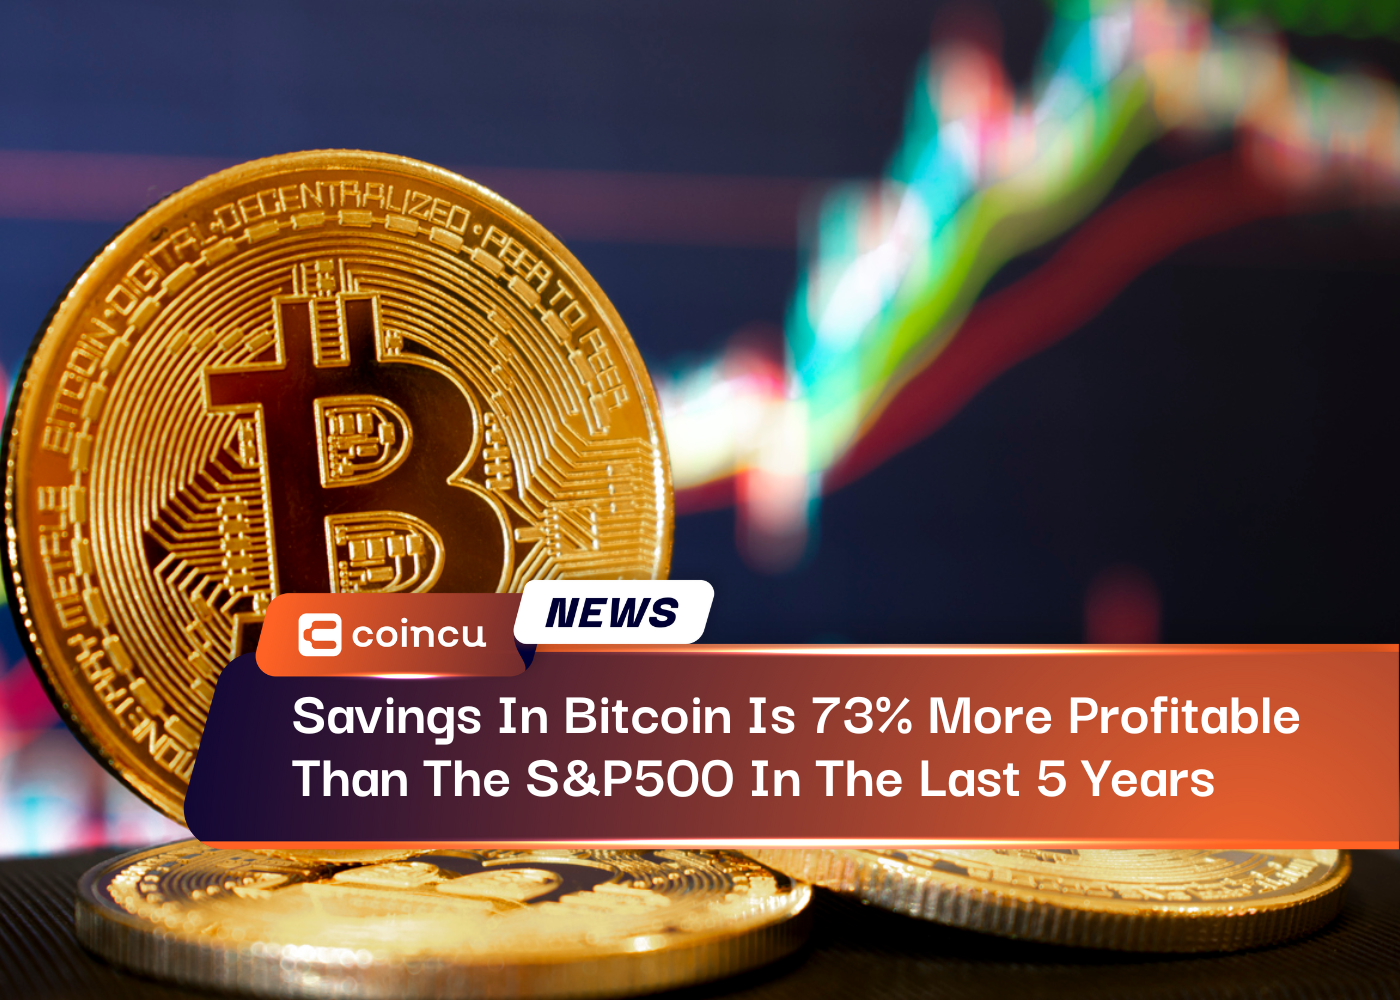 Savings In Bitcoin Is 73% More Profitable Than The S&P500 In The Last 5 Years